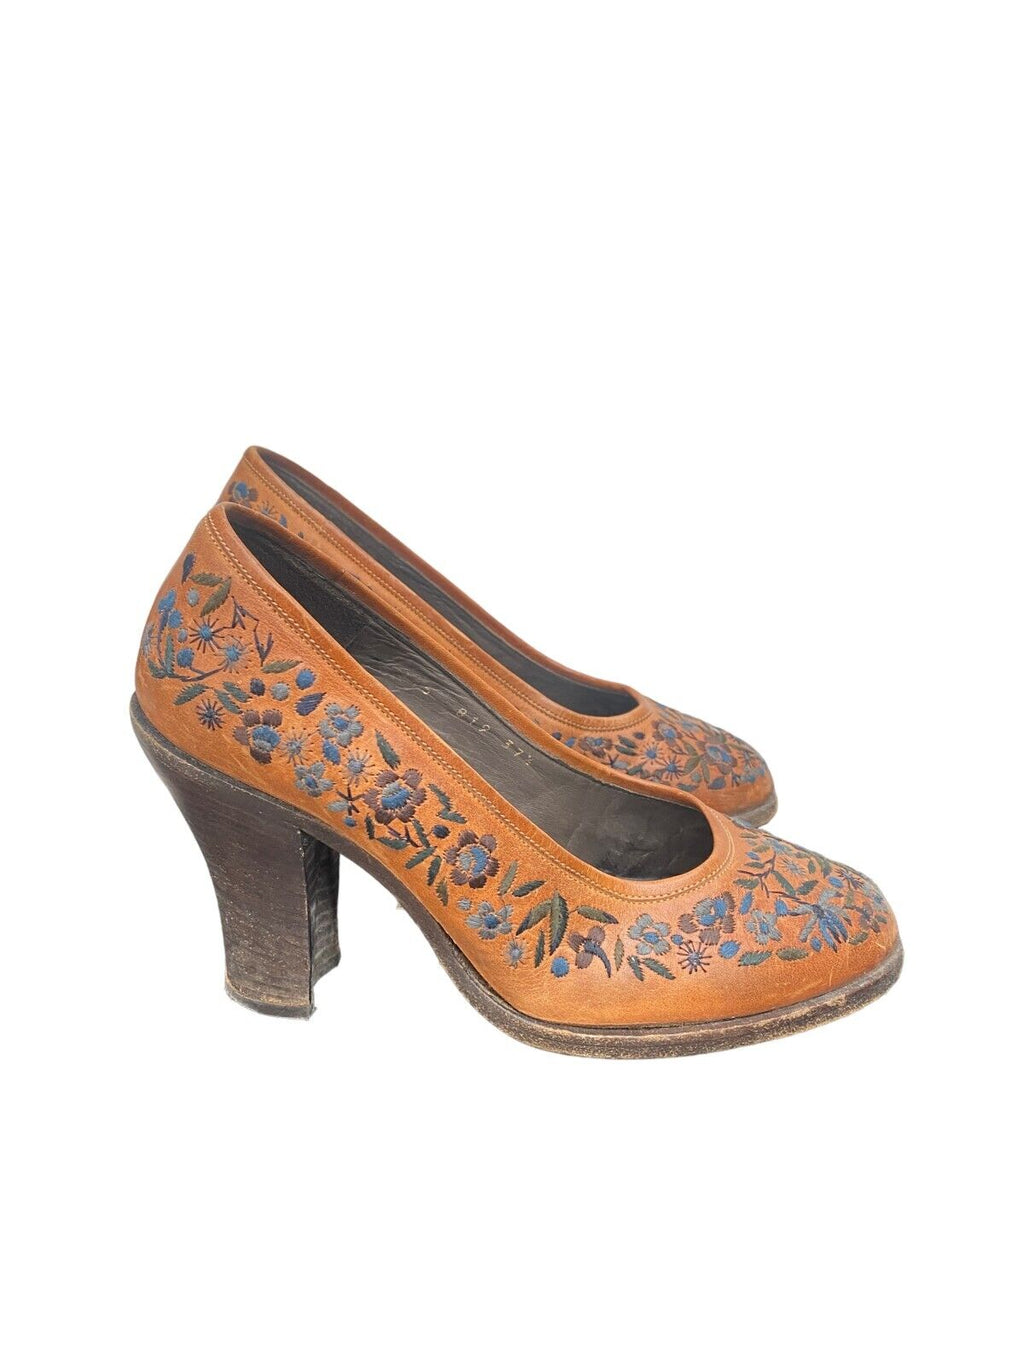 Embroidered Leather Shoes Heels